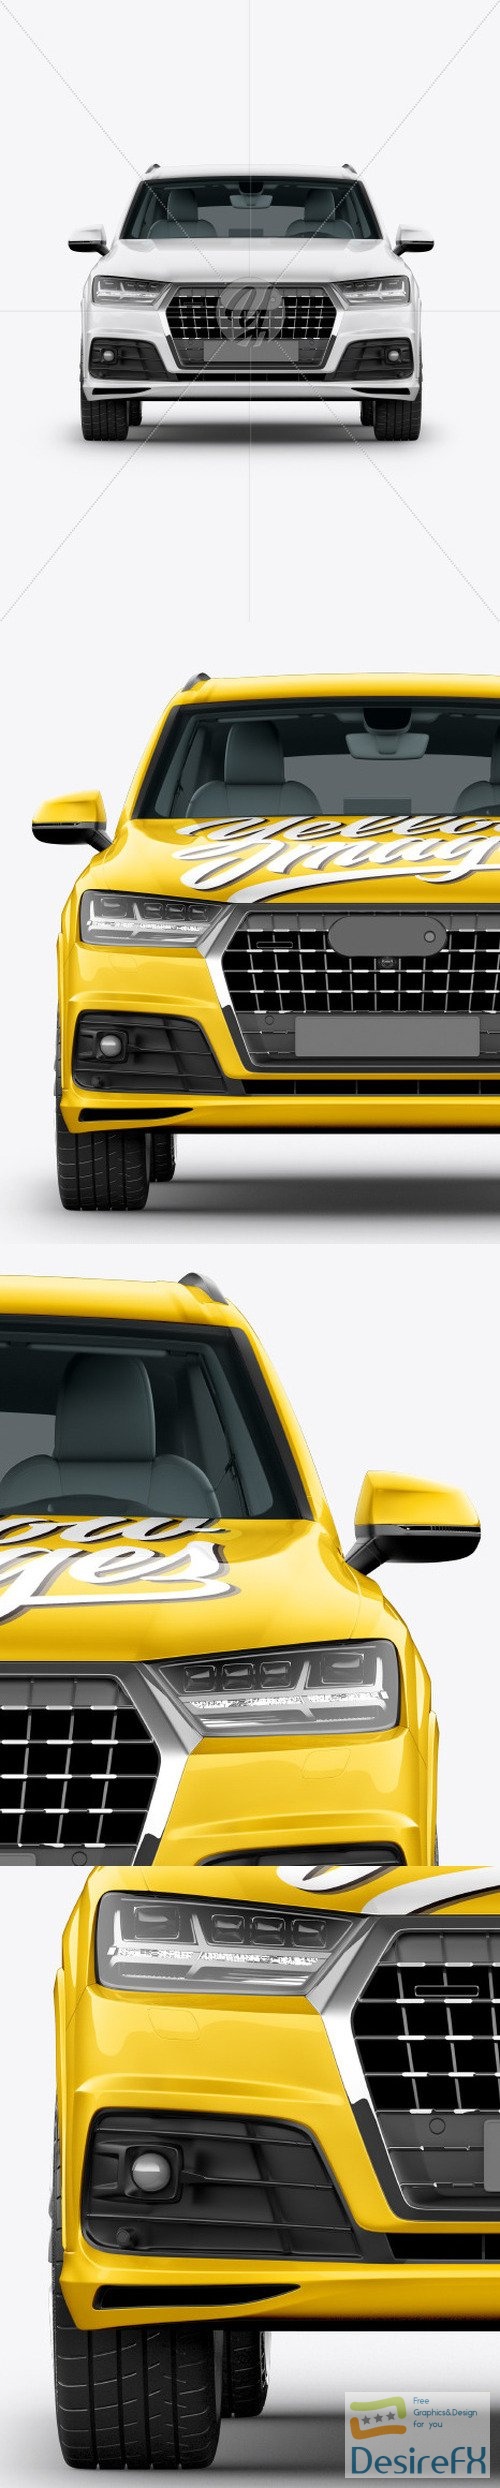 Crossover SUV Mockup - Front View 48615